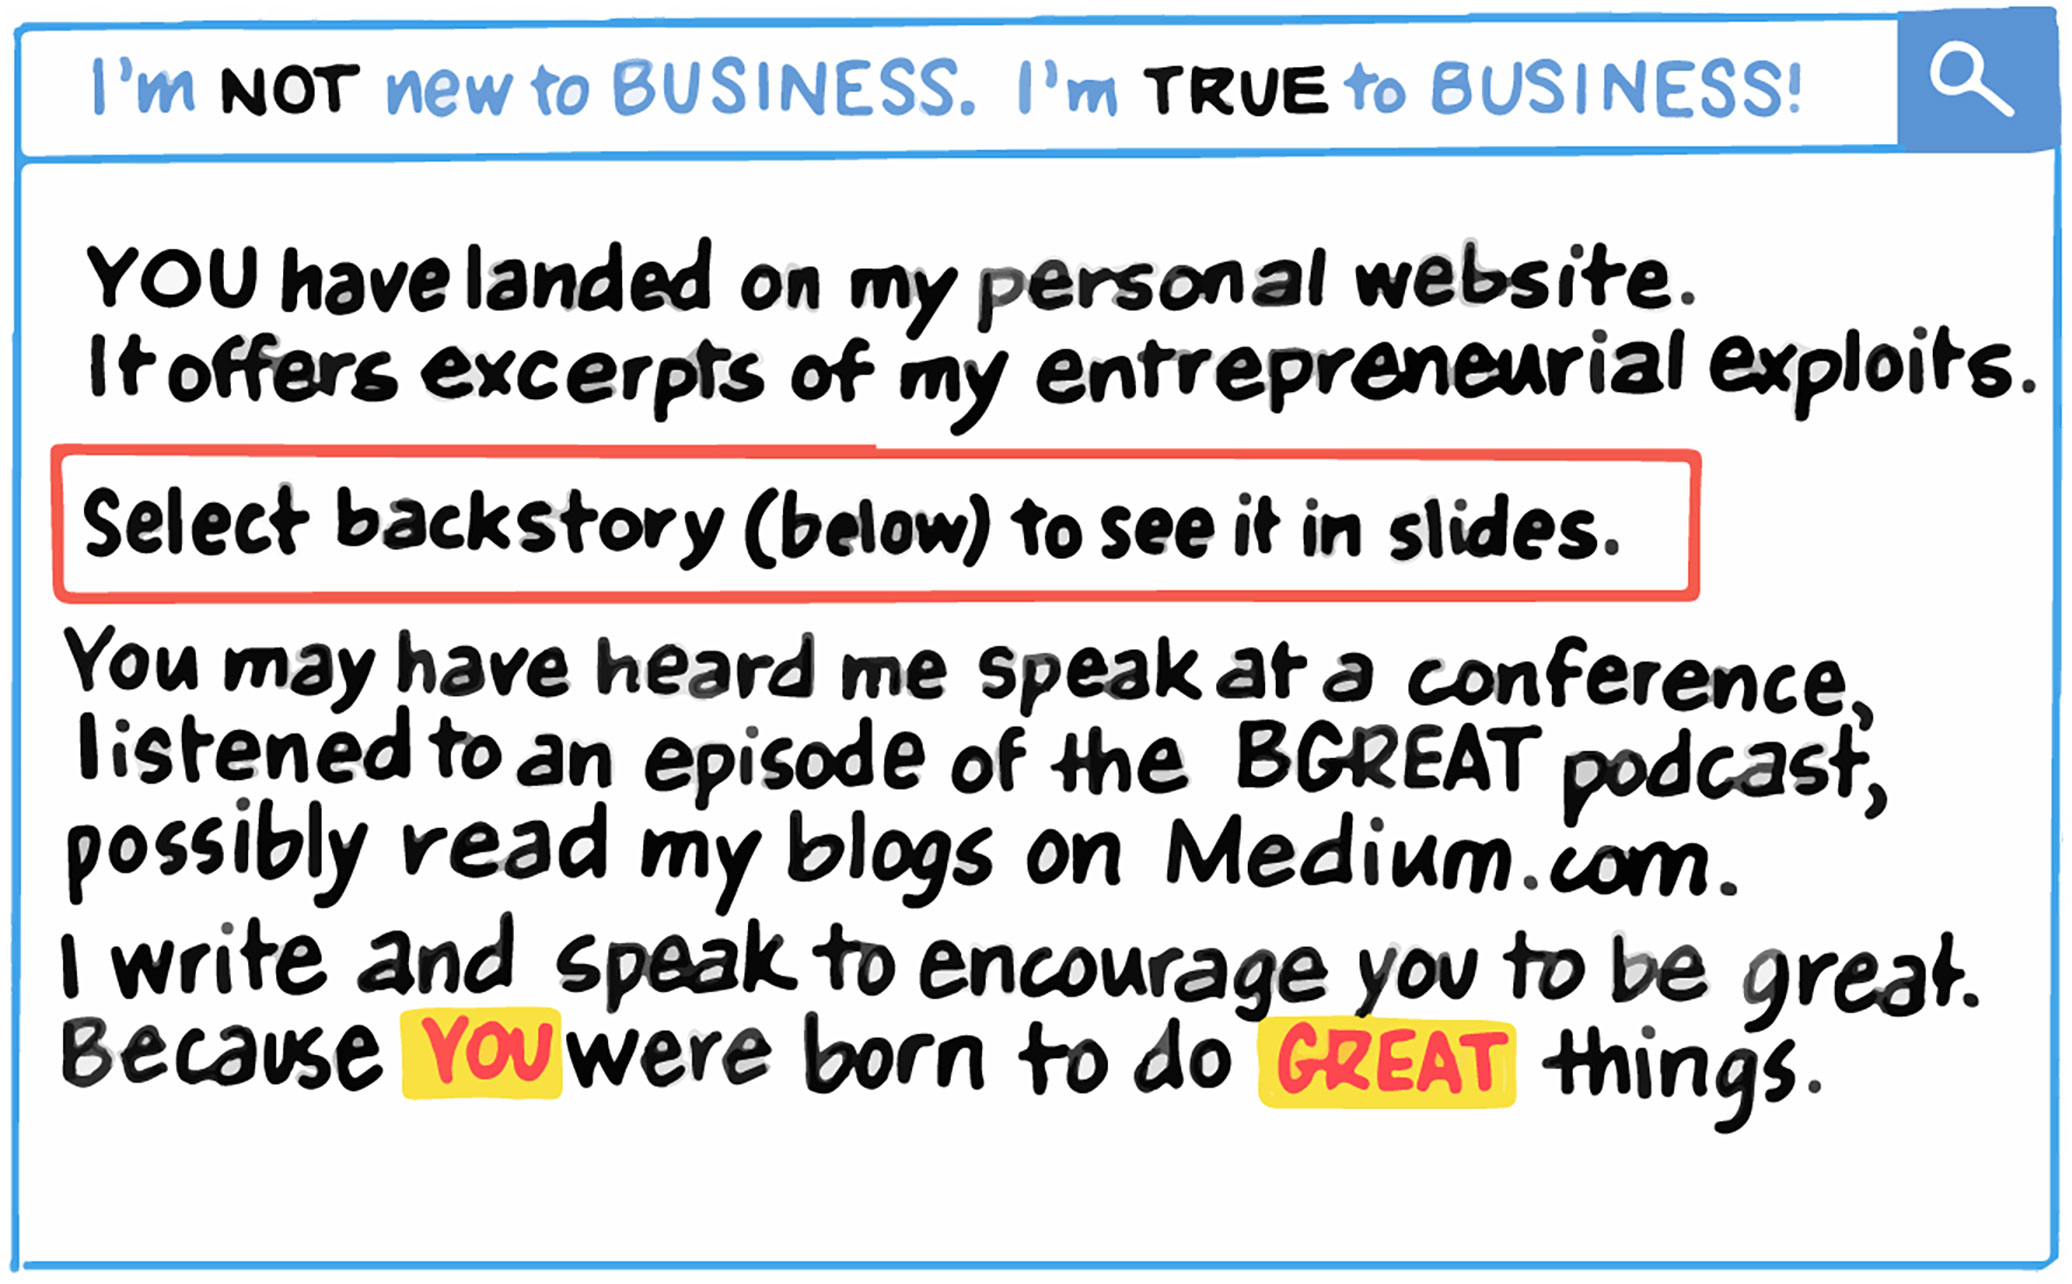 You have landed on my personal website. It offers excerpts of my entrepreneurial exploits. Select backstory below to see it in slides.